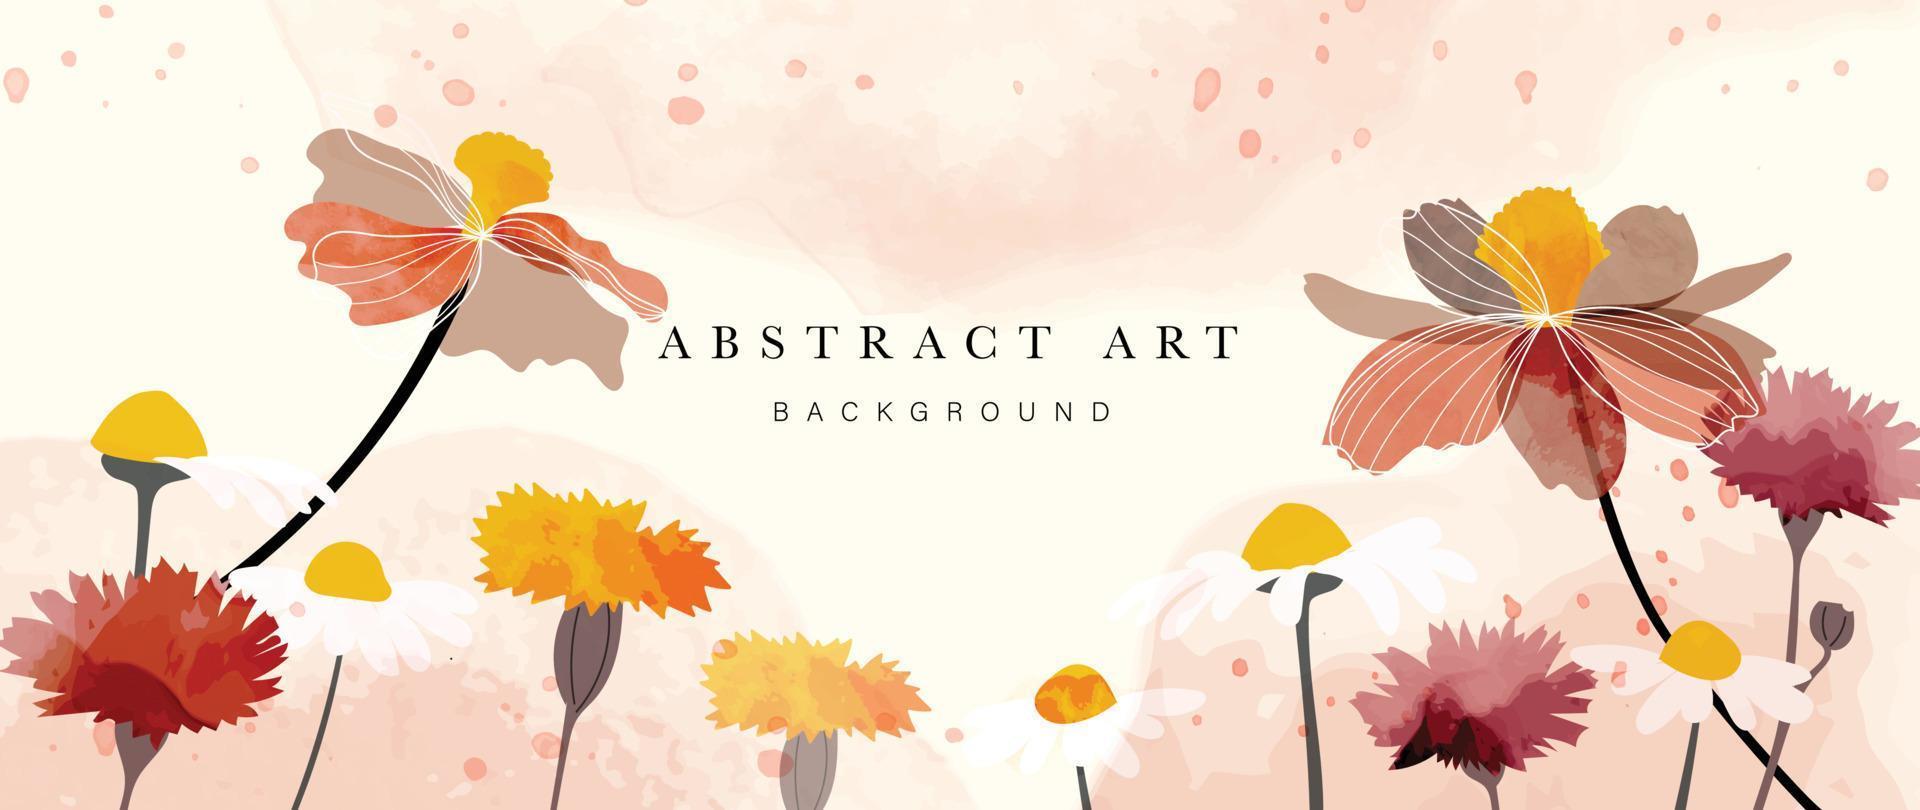 Abstract floral art background vector. Botanical watercolor hand drawn flowers paint brush line art. Design illustration for wallpaper, banner, print, poster, cover, greeting and invitation card. vector